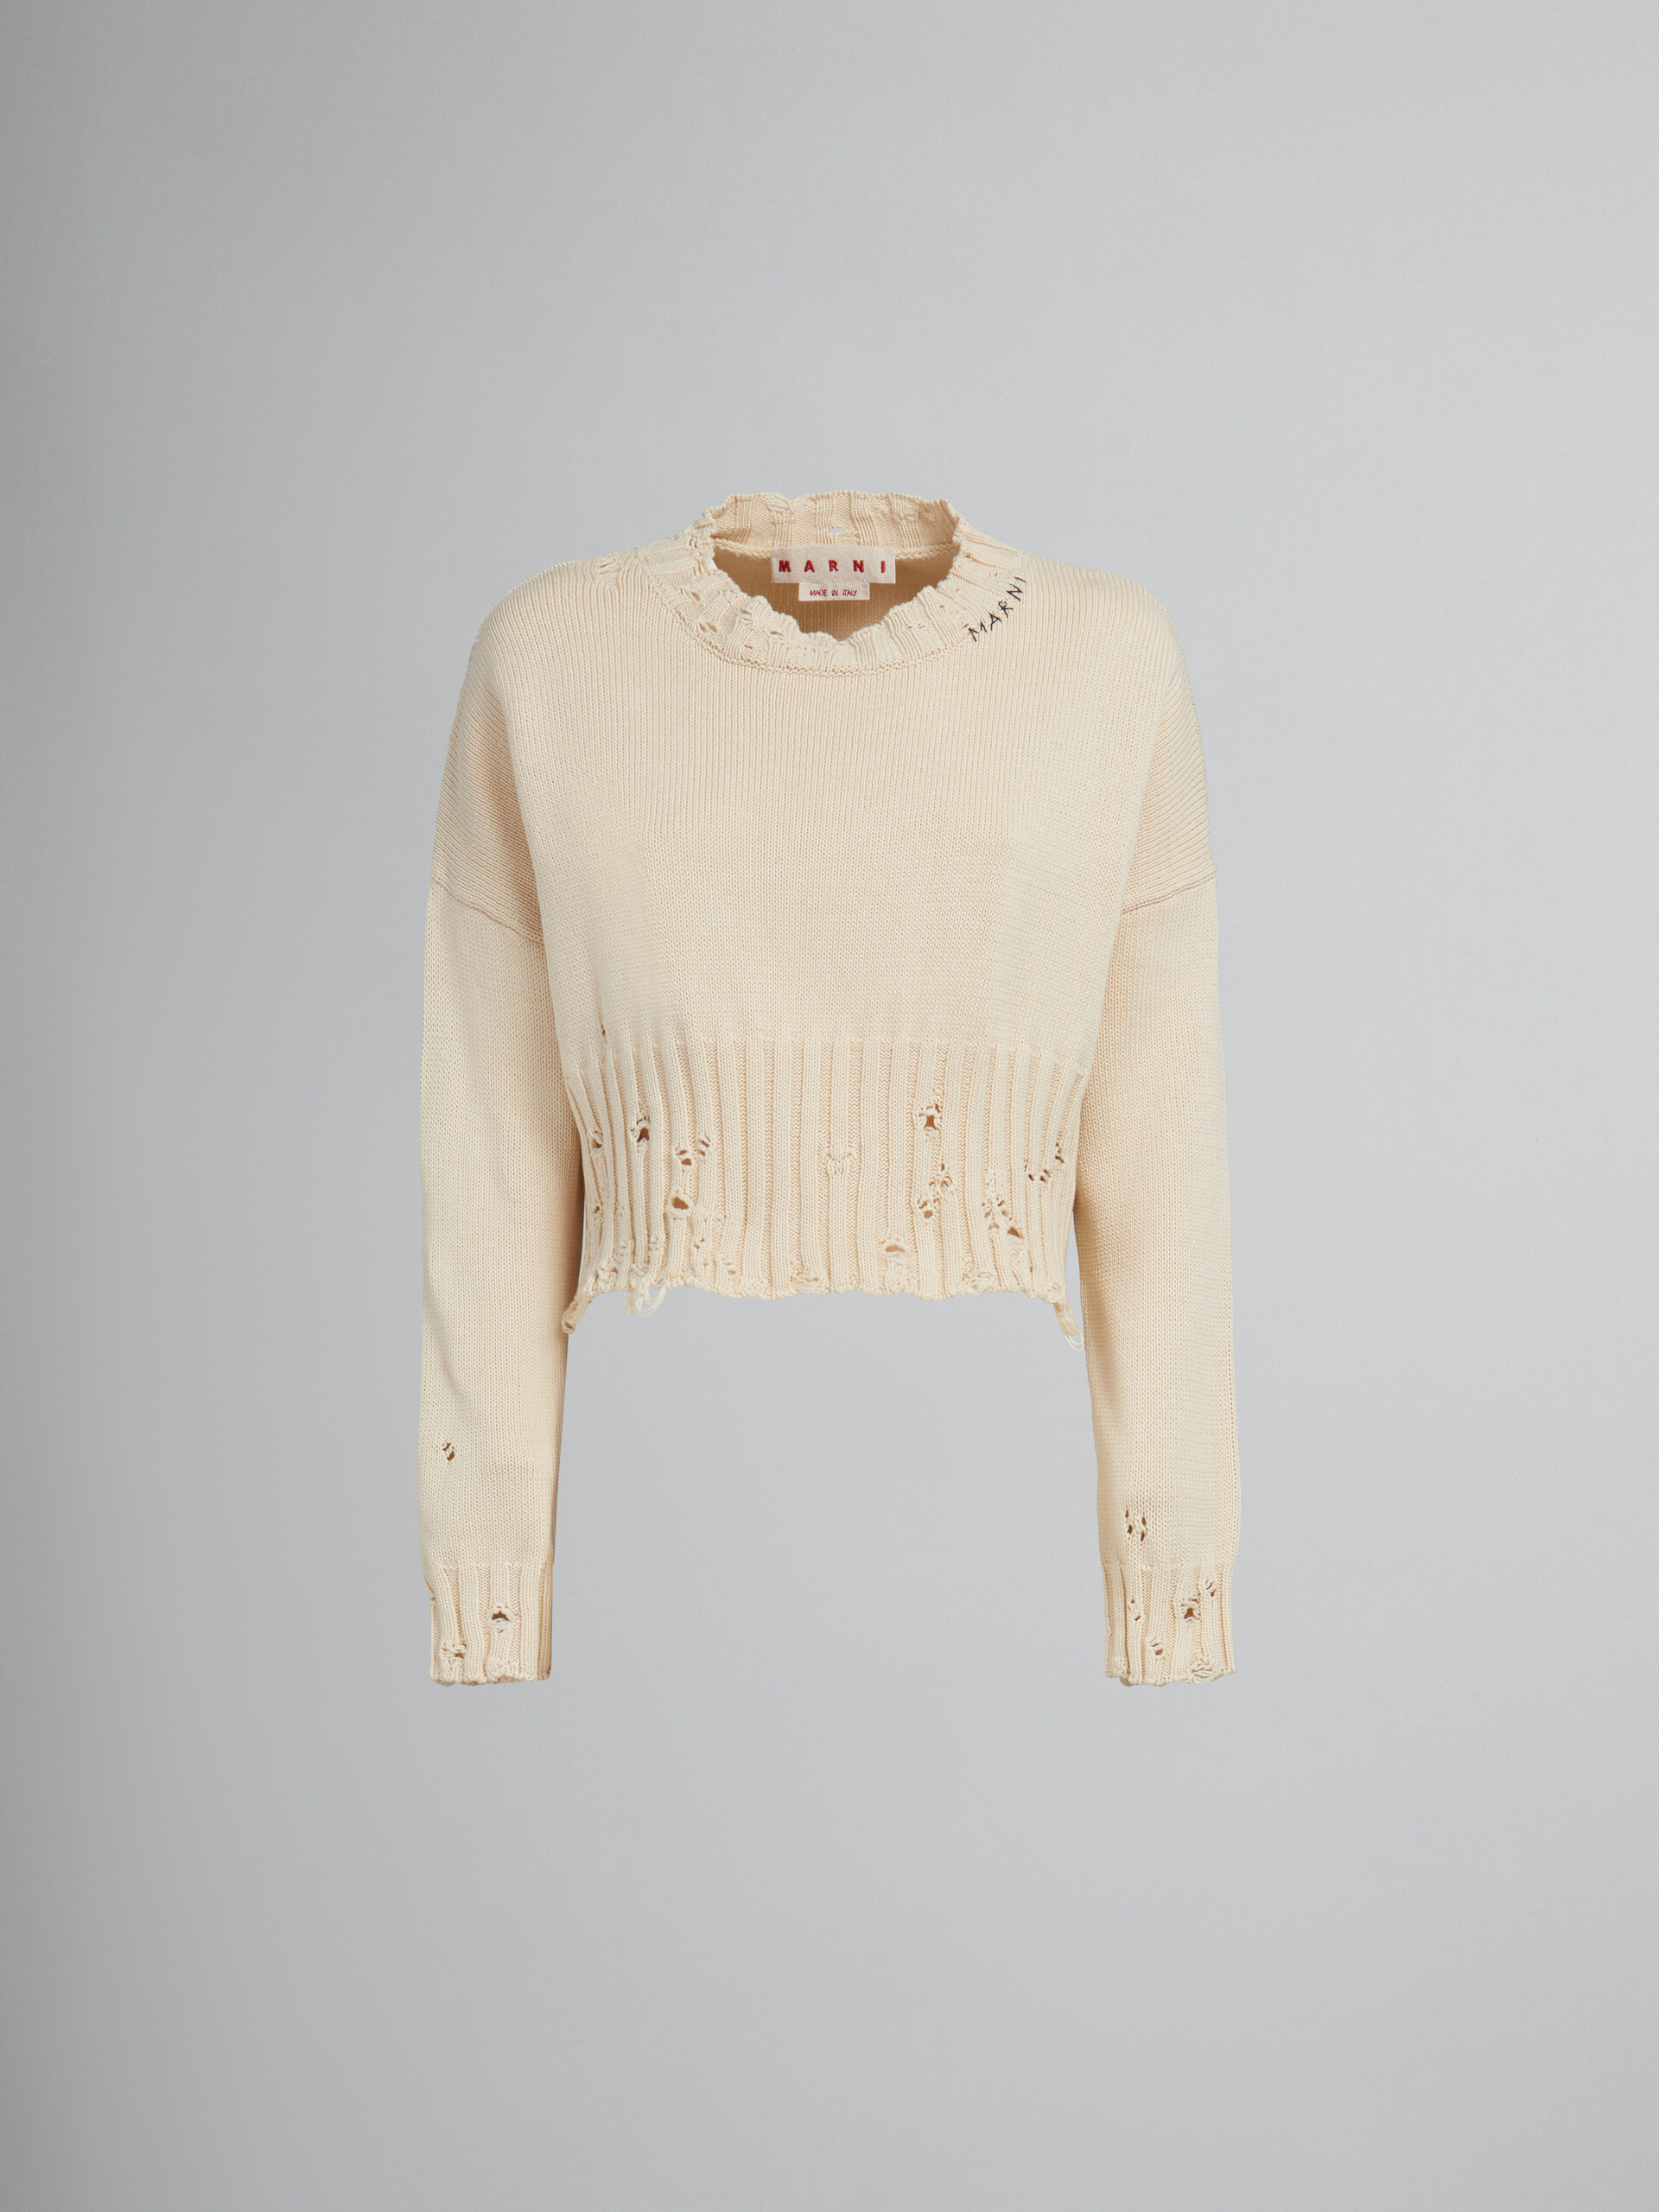 Black dishevelled cotton cropped jumper - Pullovers - Image 1